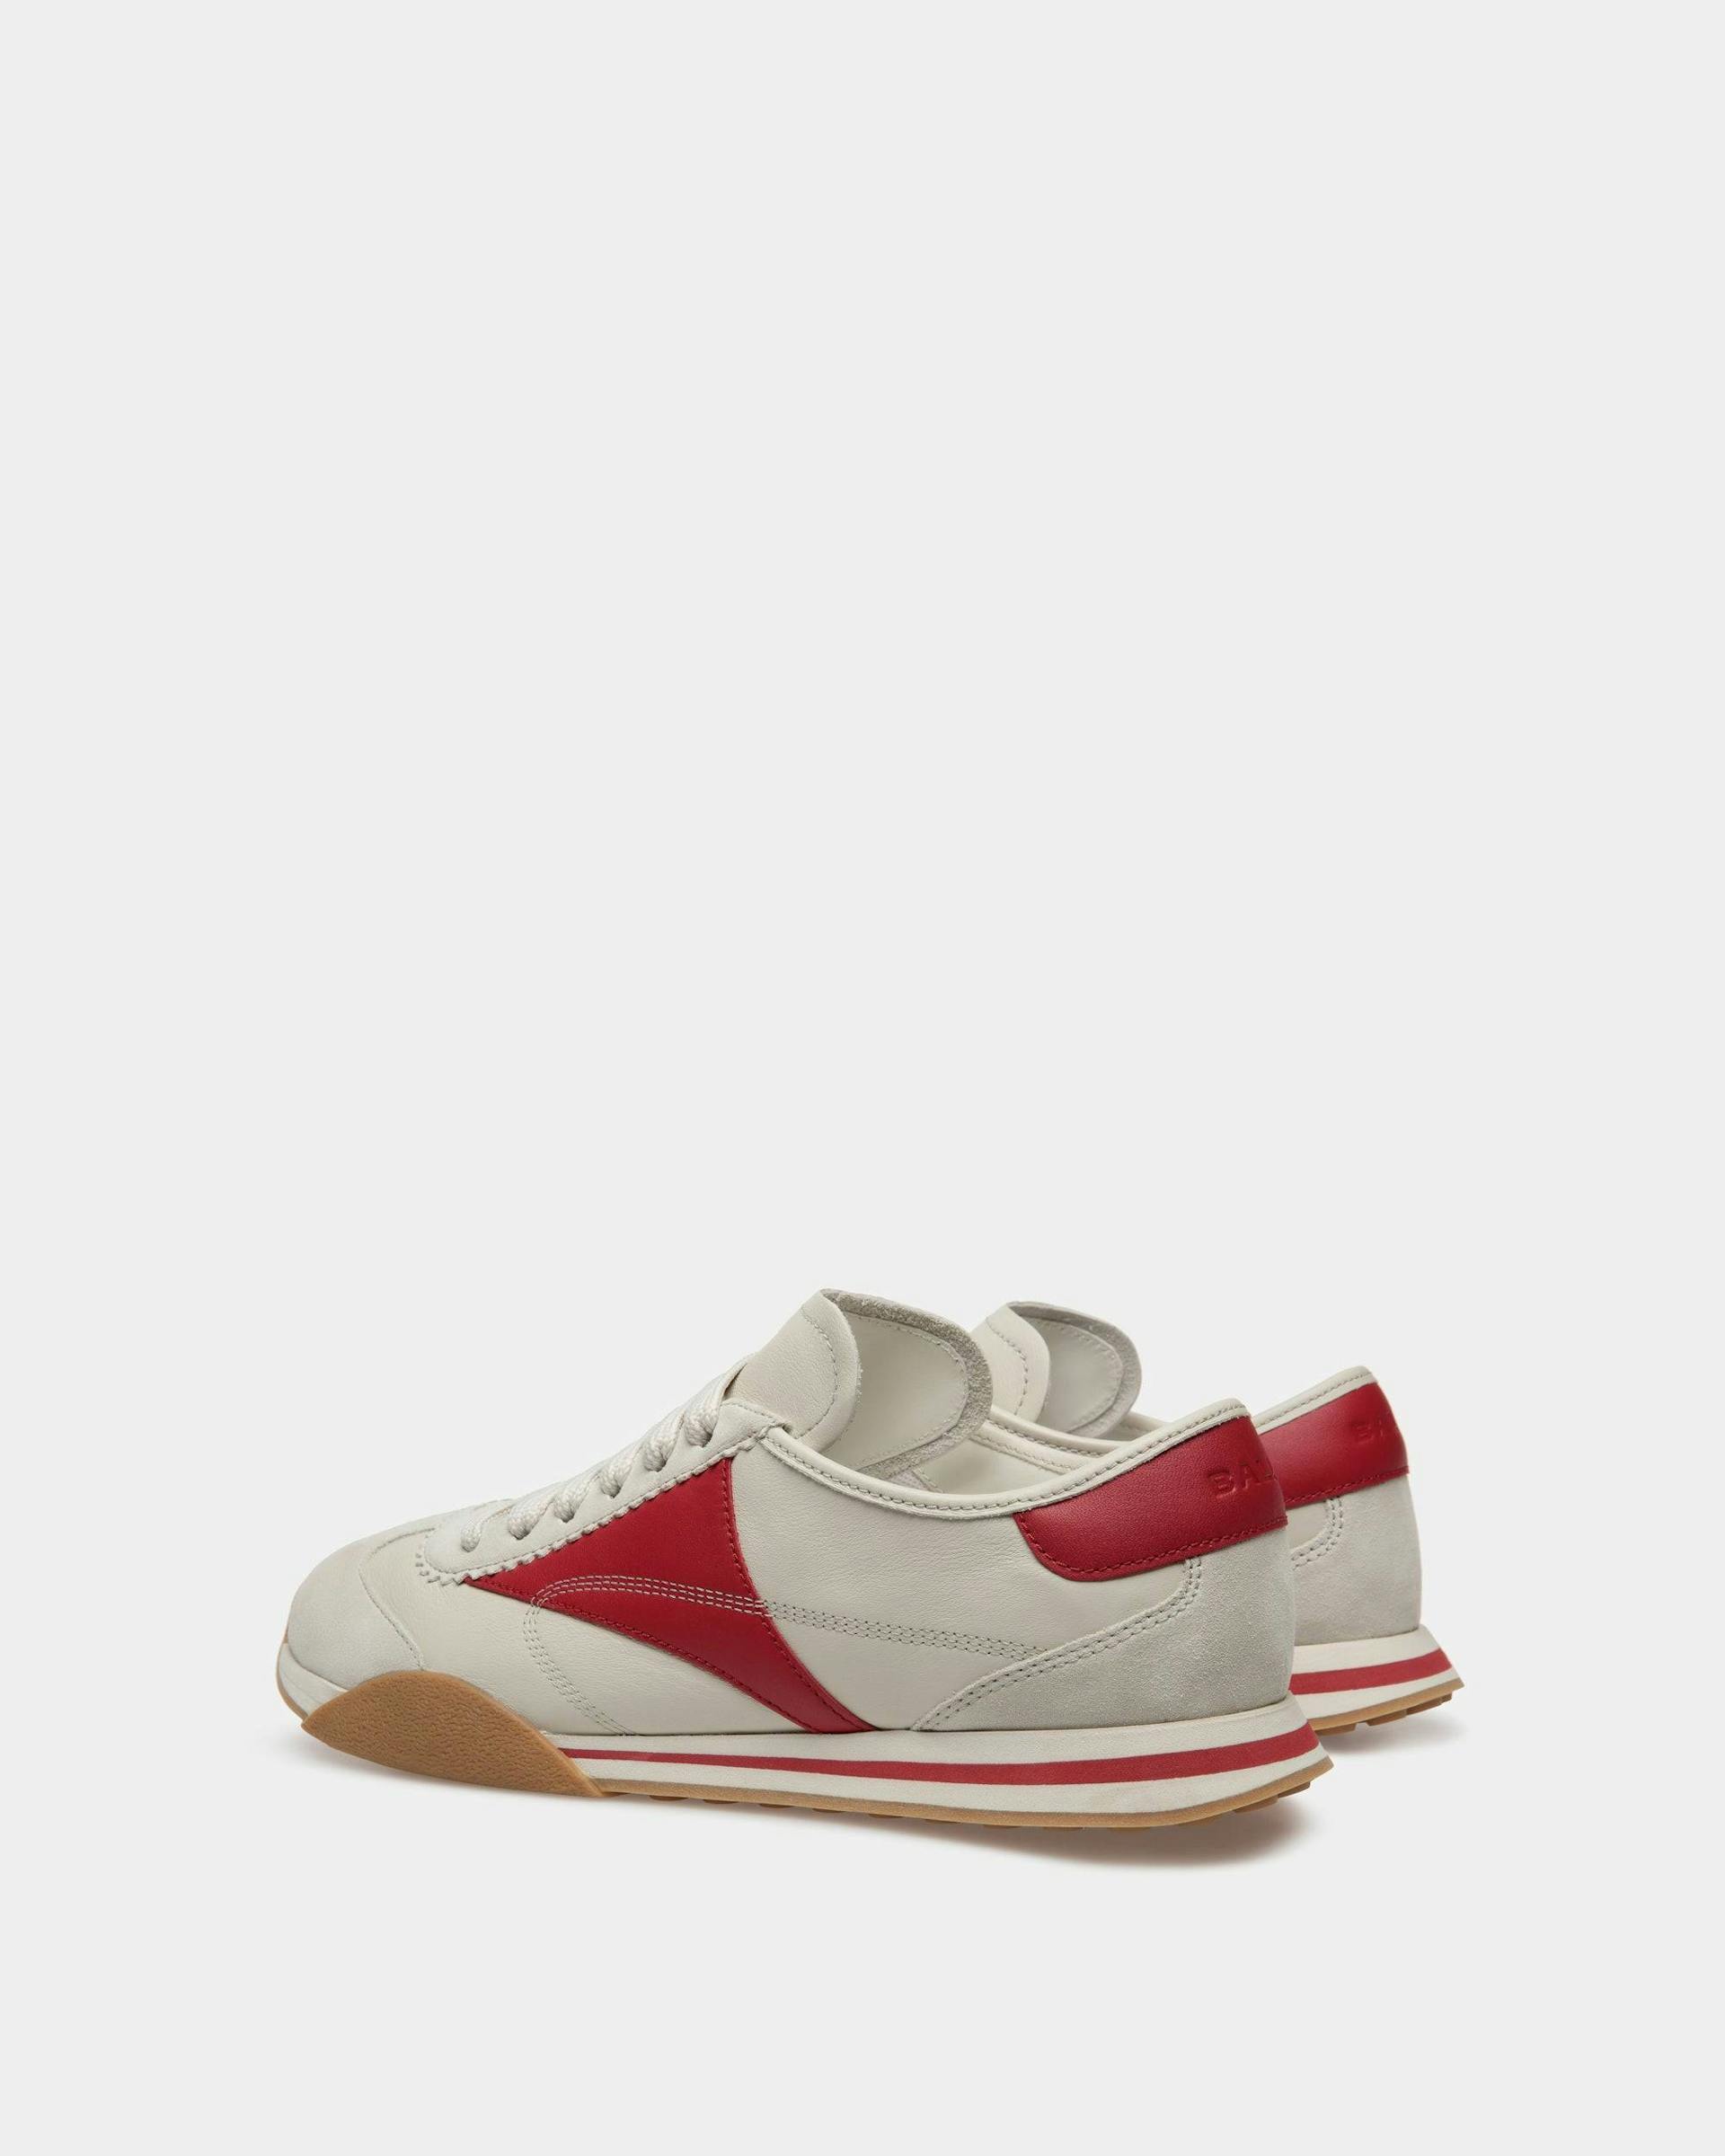 Sussex Sneakers In Dusty White And Deep Ruby Leather - Men's - Bally - 03